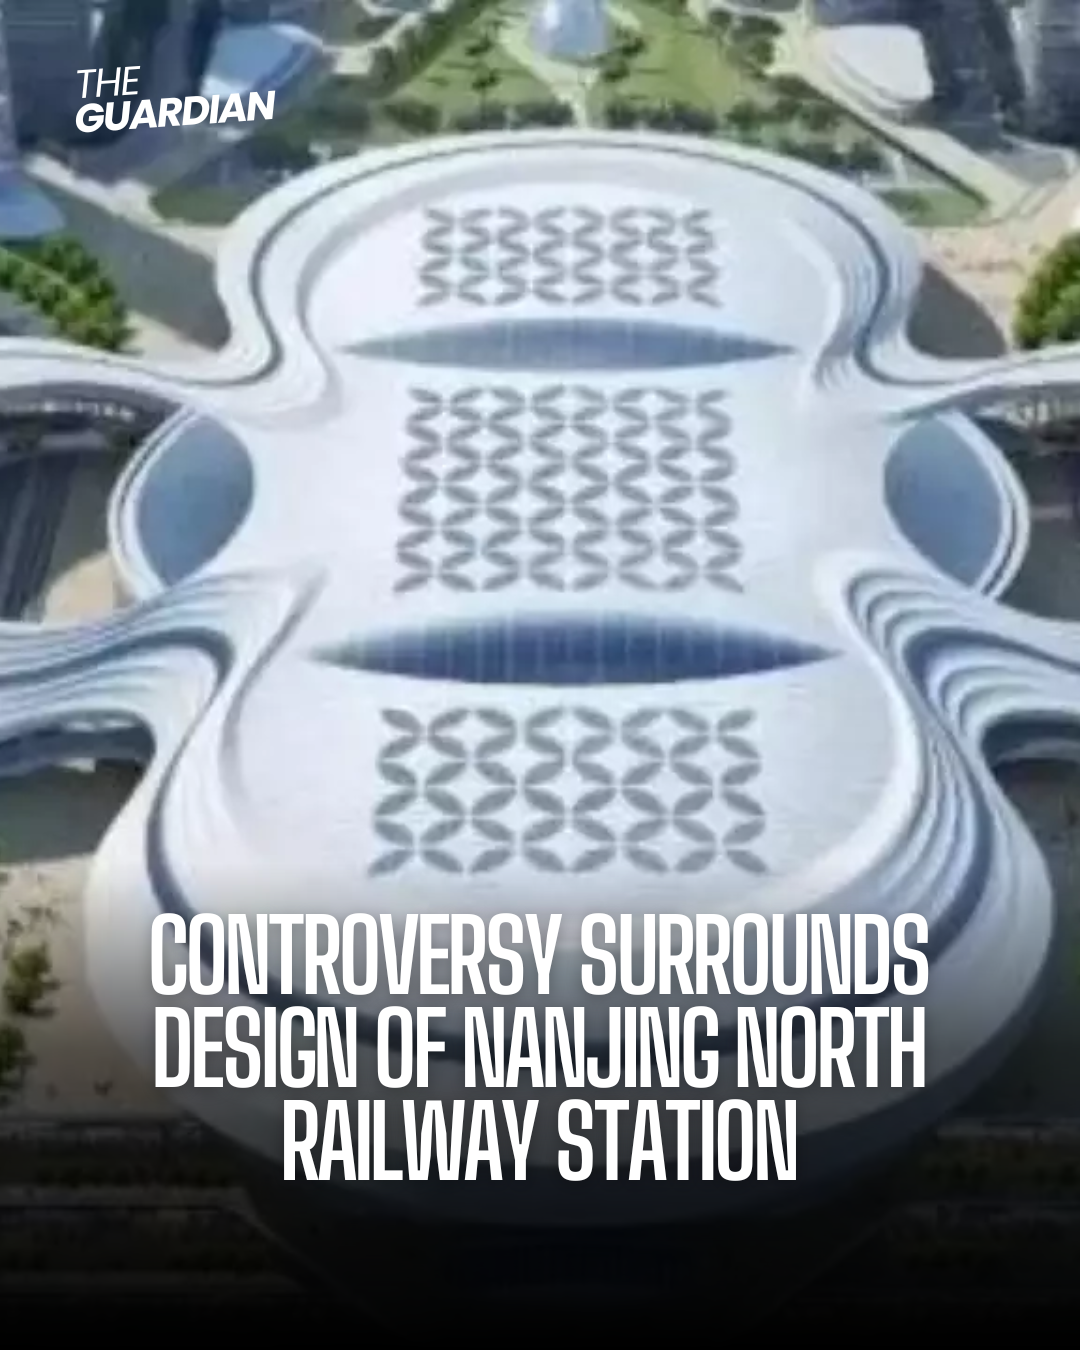 The introduction of the design for the planned Nanjing North Railway Station in China has caused criticism.